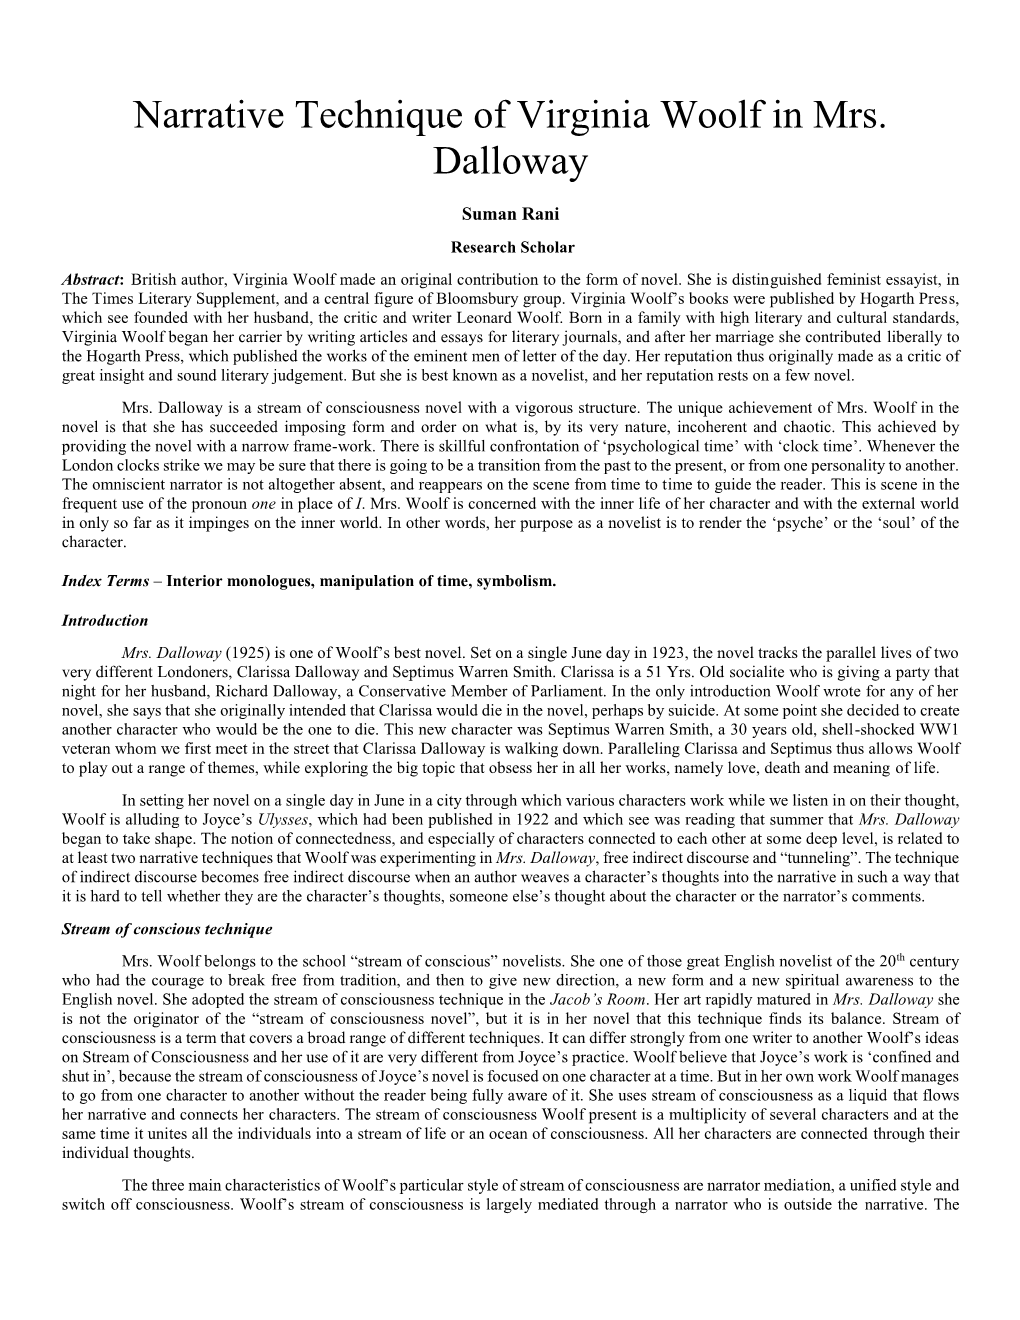 Narrative Technique of Virginia Woolf in Mrs. Dalloway